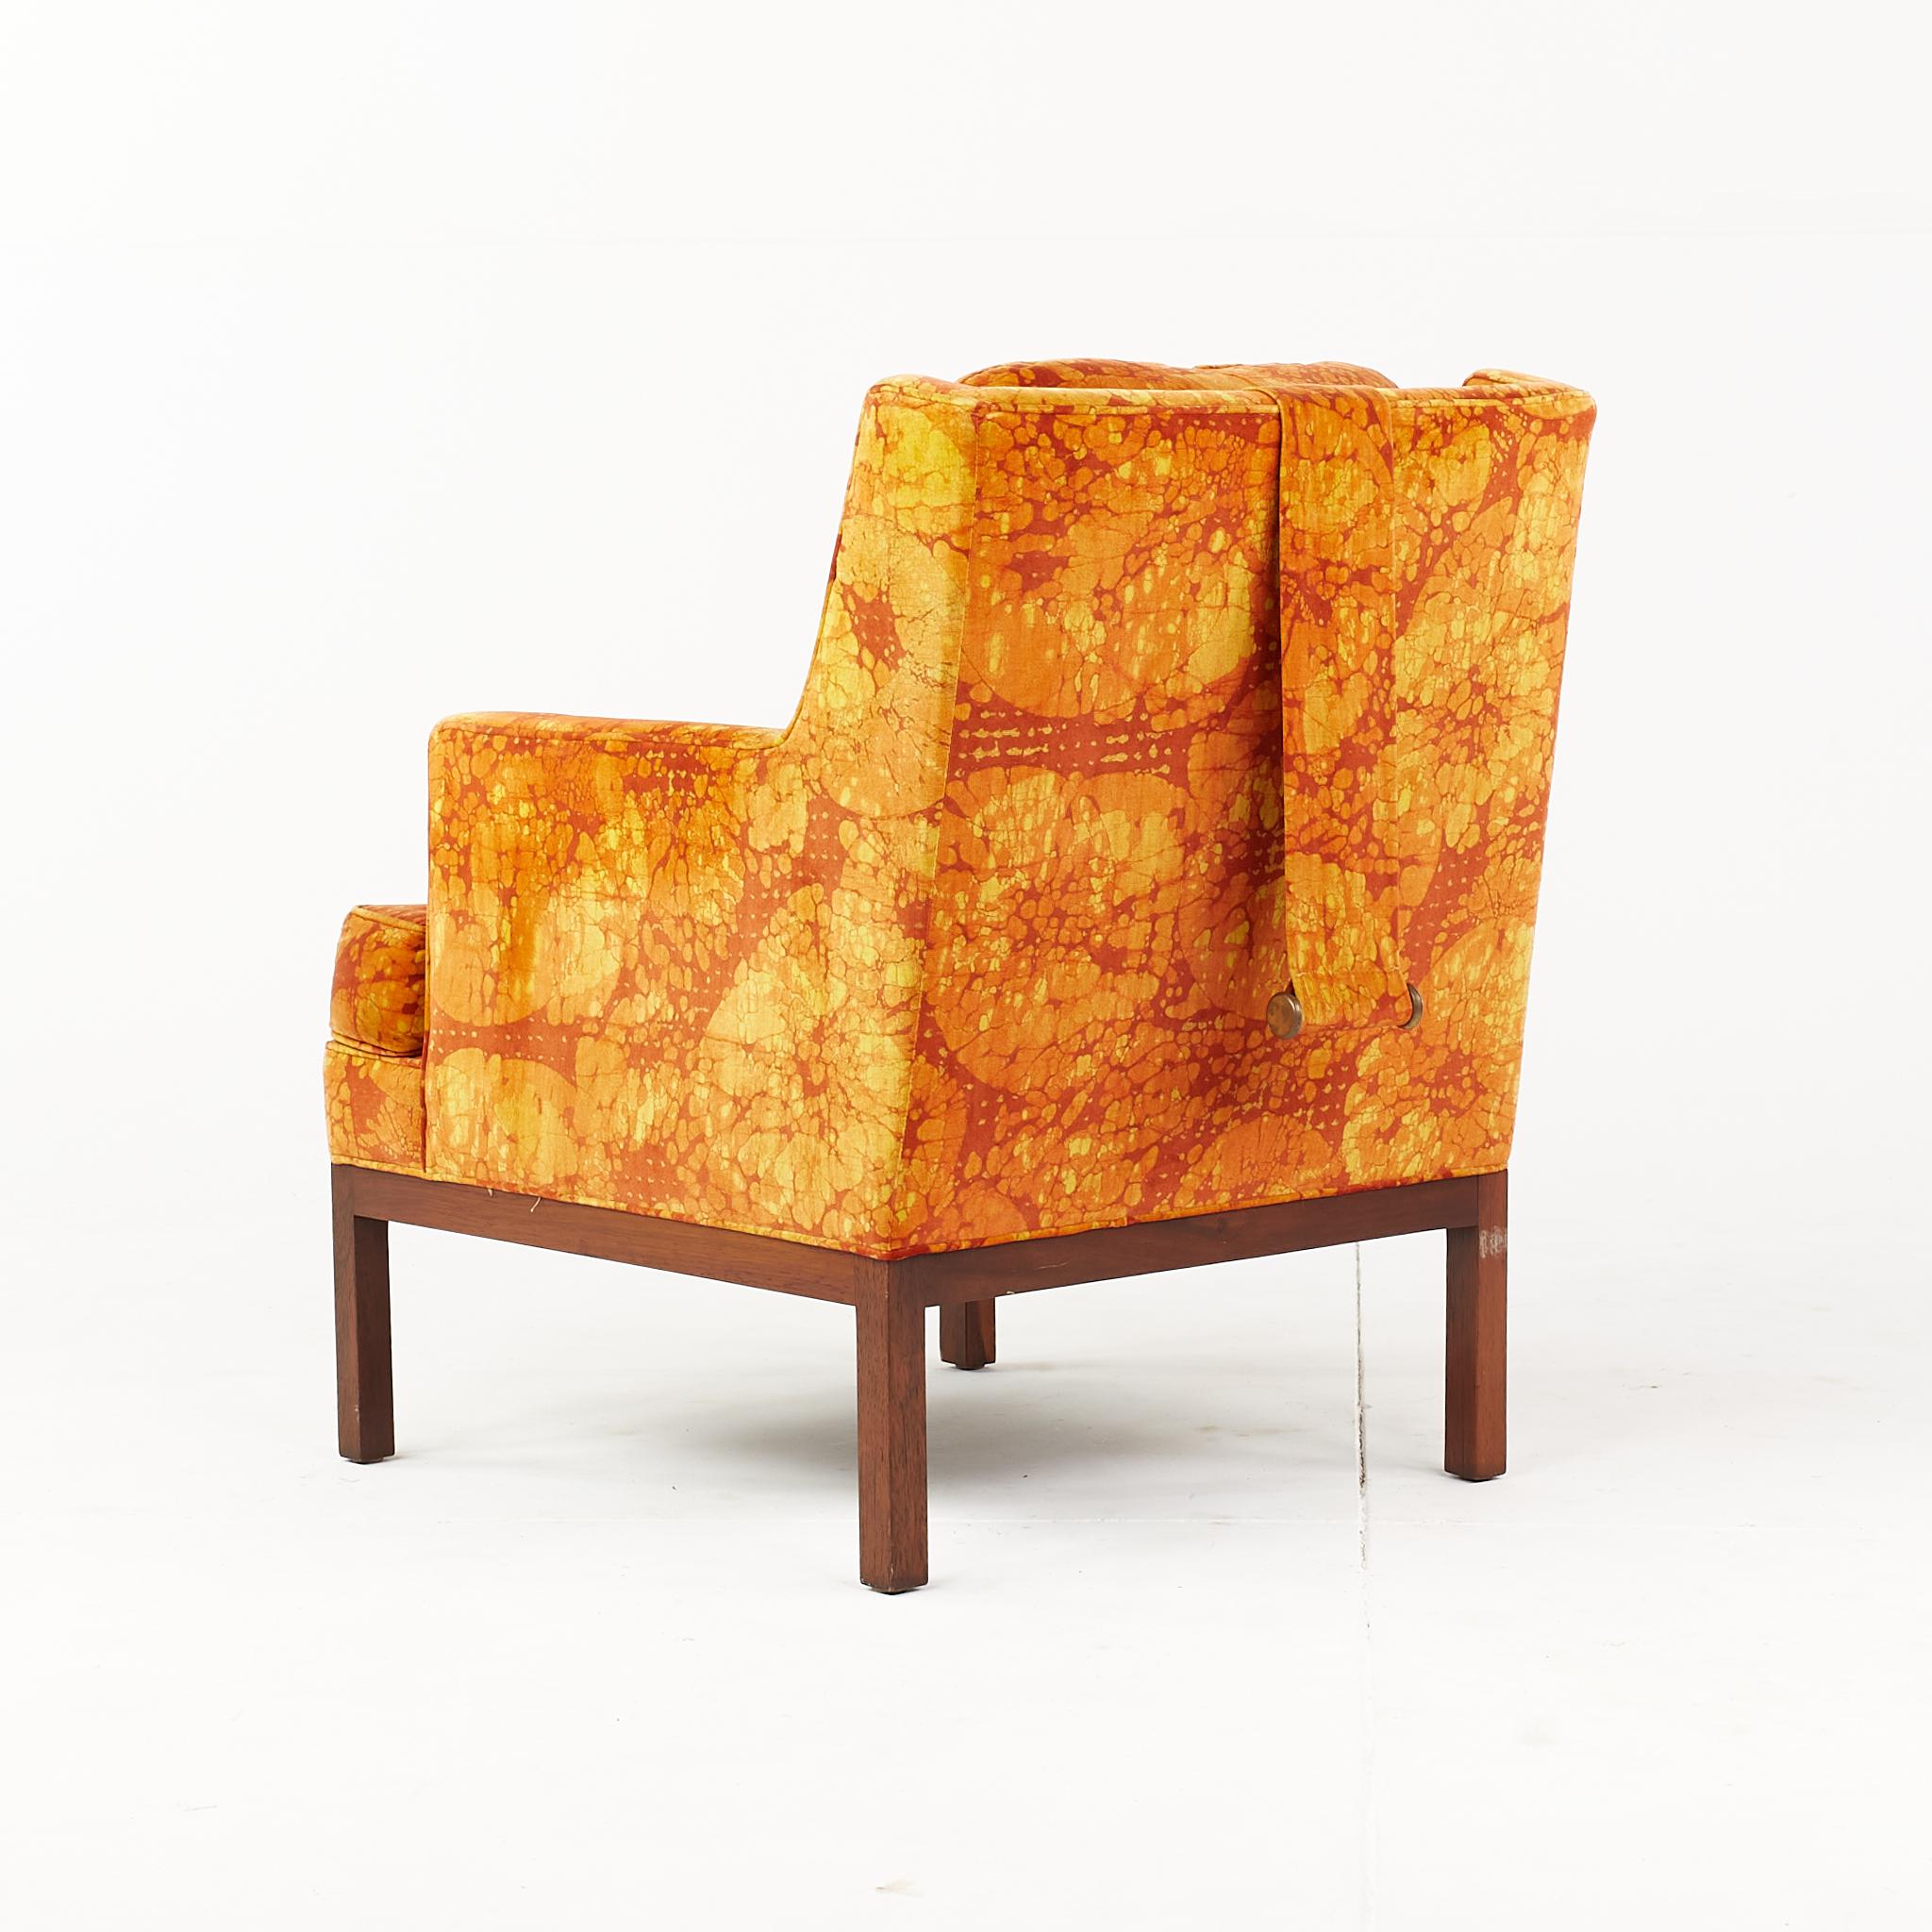 Late 20th Century Edward Wormley for Dunbar Mid Century Lounge Chair with Jack Lenor Larsen Fabric For Sale